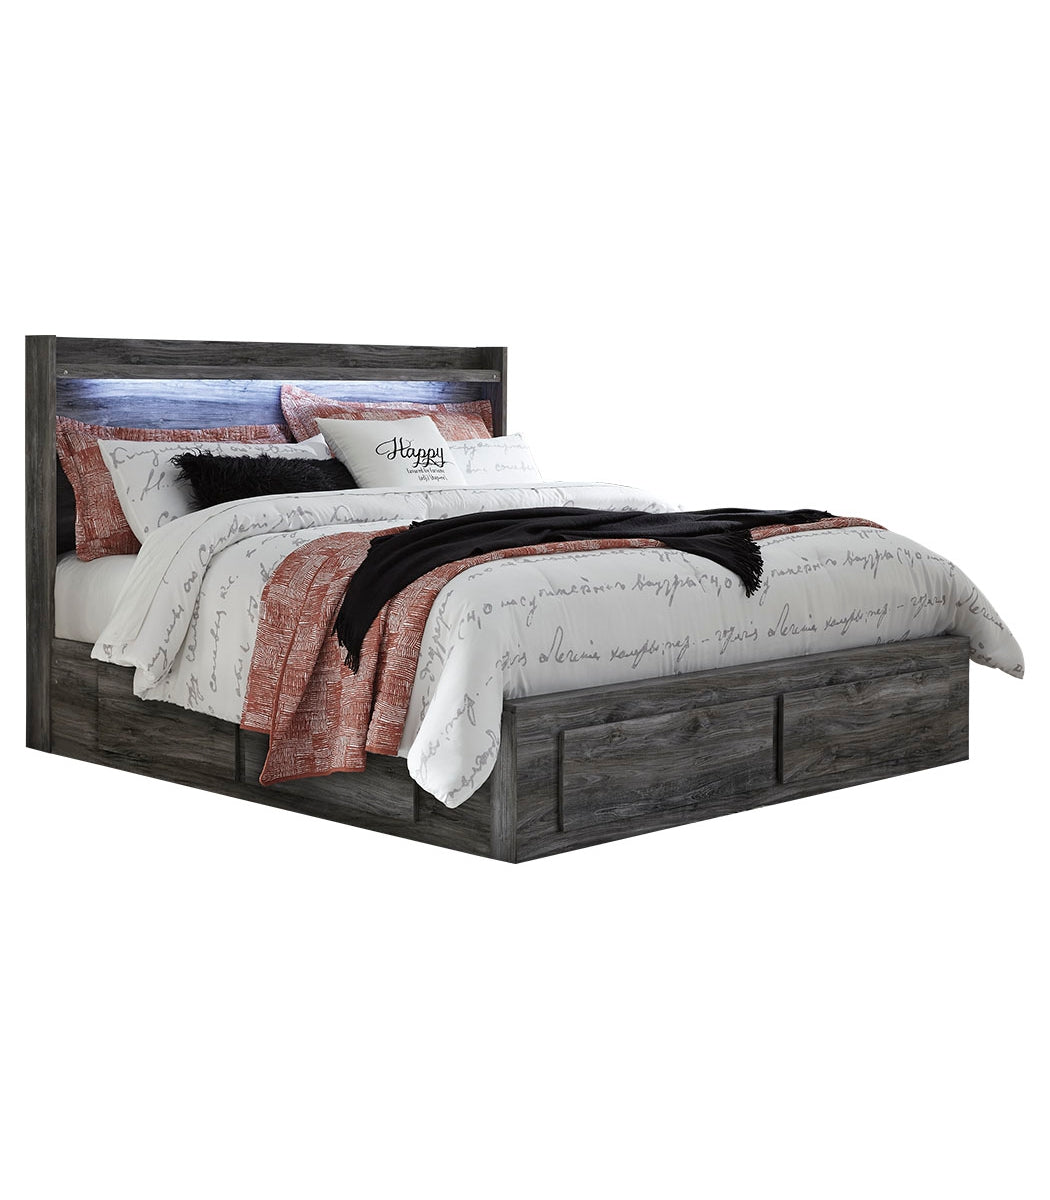 Baystorm King Panel Bed with 4 Storage Drawers